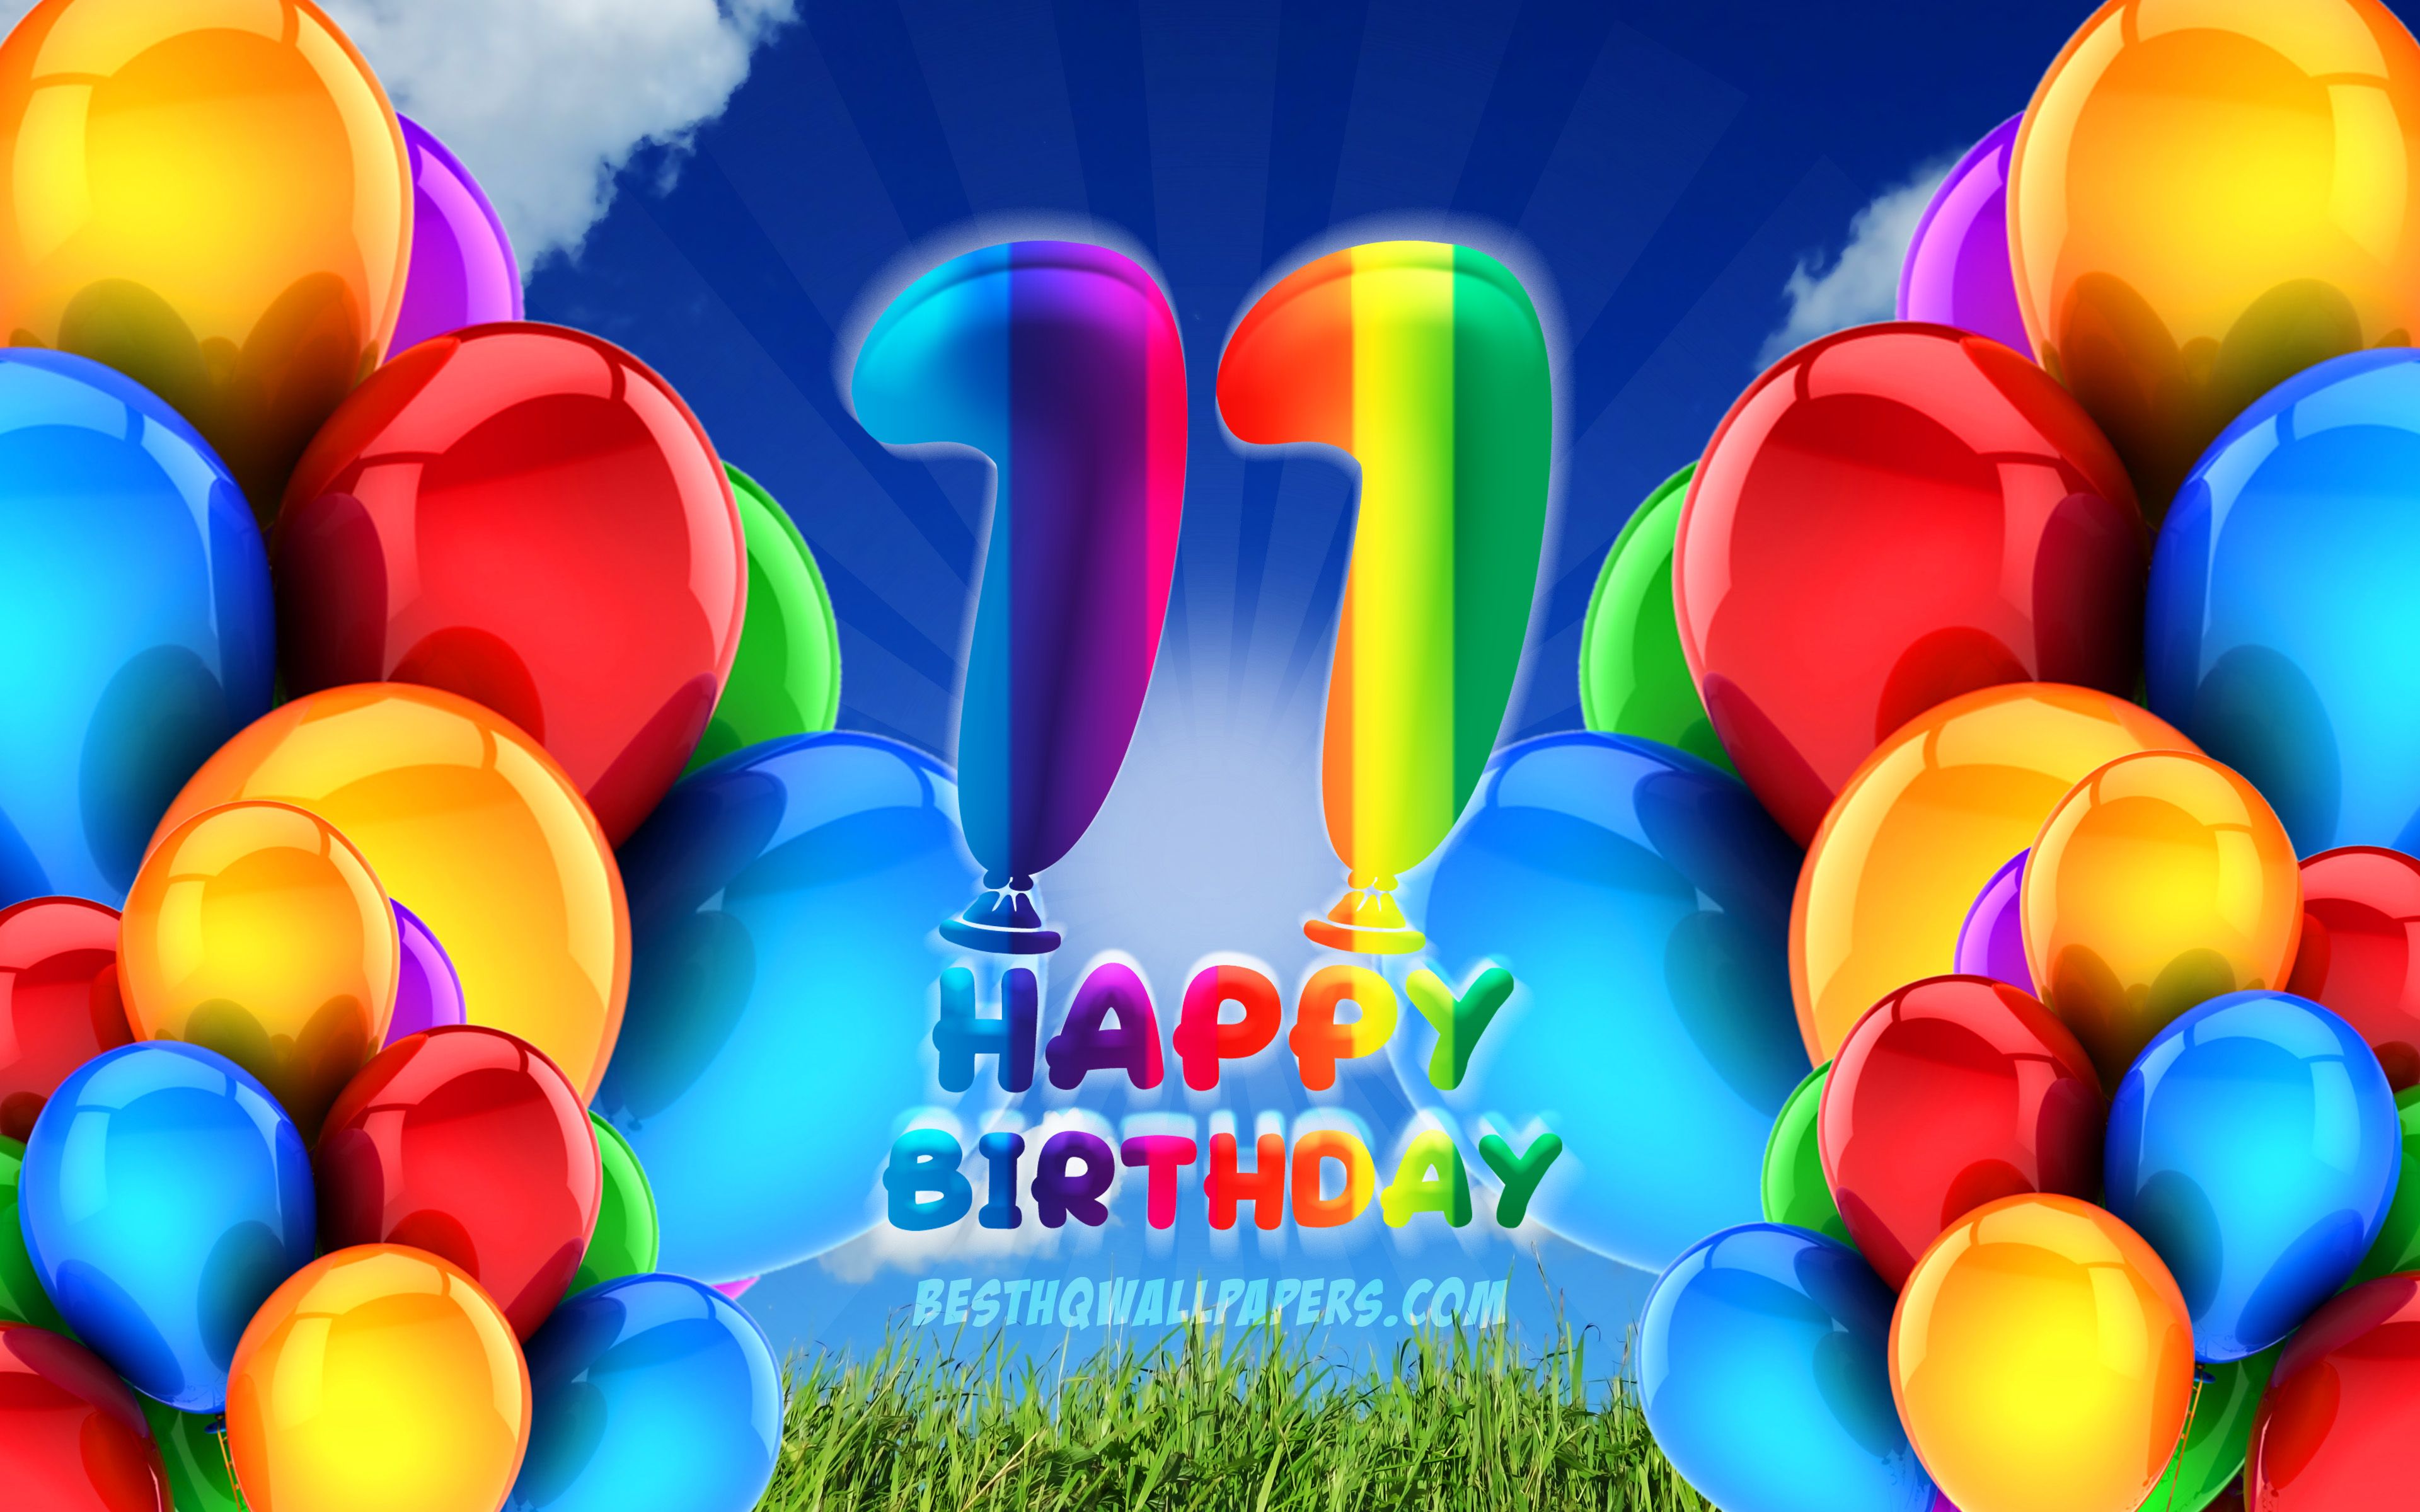 Download wallpaper 4k, Happy 11 Years Birthday, cloudy sky background, Birthday Party, colorful ballons, Happy 11th birthday, artwork, 11th Birthday, Birthday concept, 11th Birthday Party for desktop with resolution 3840x2400. High Quality